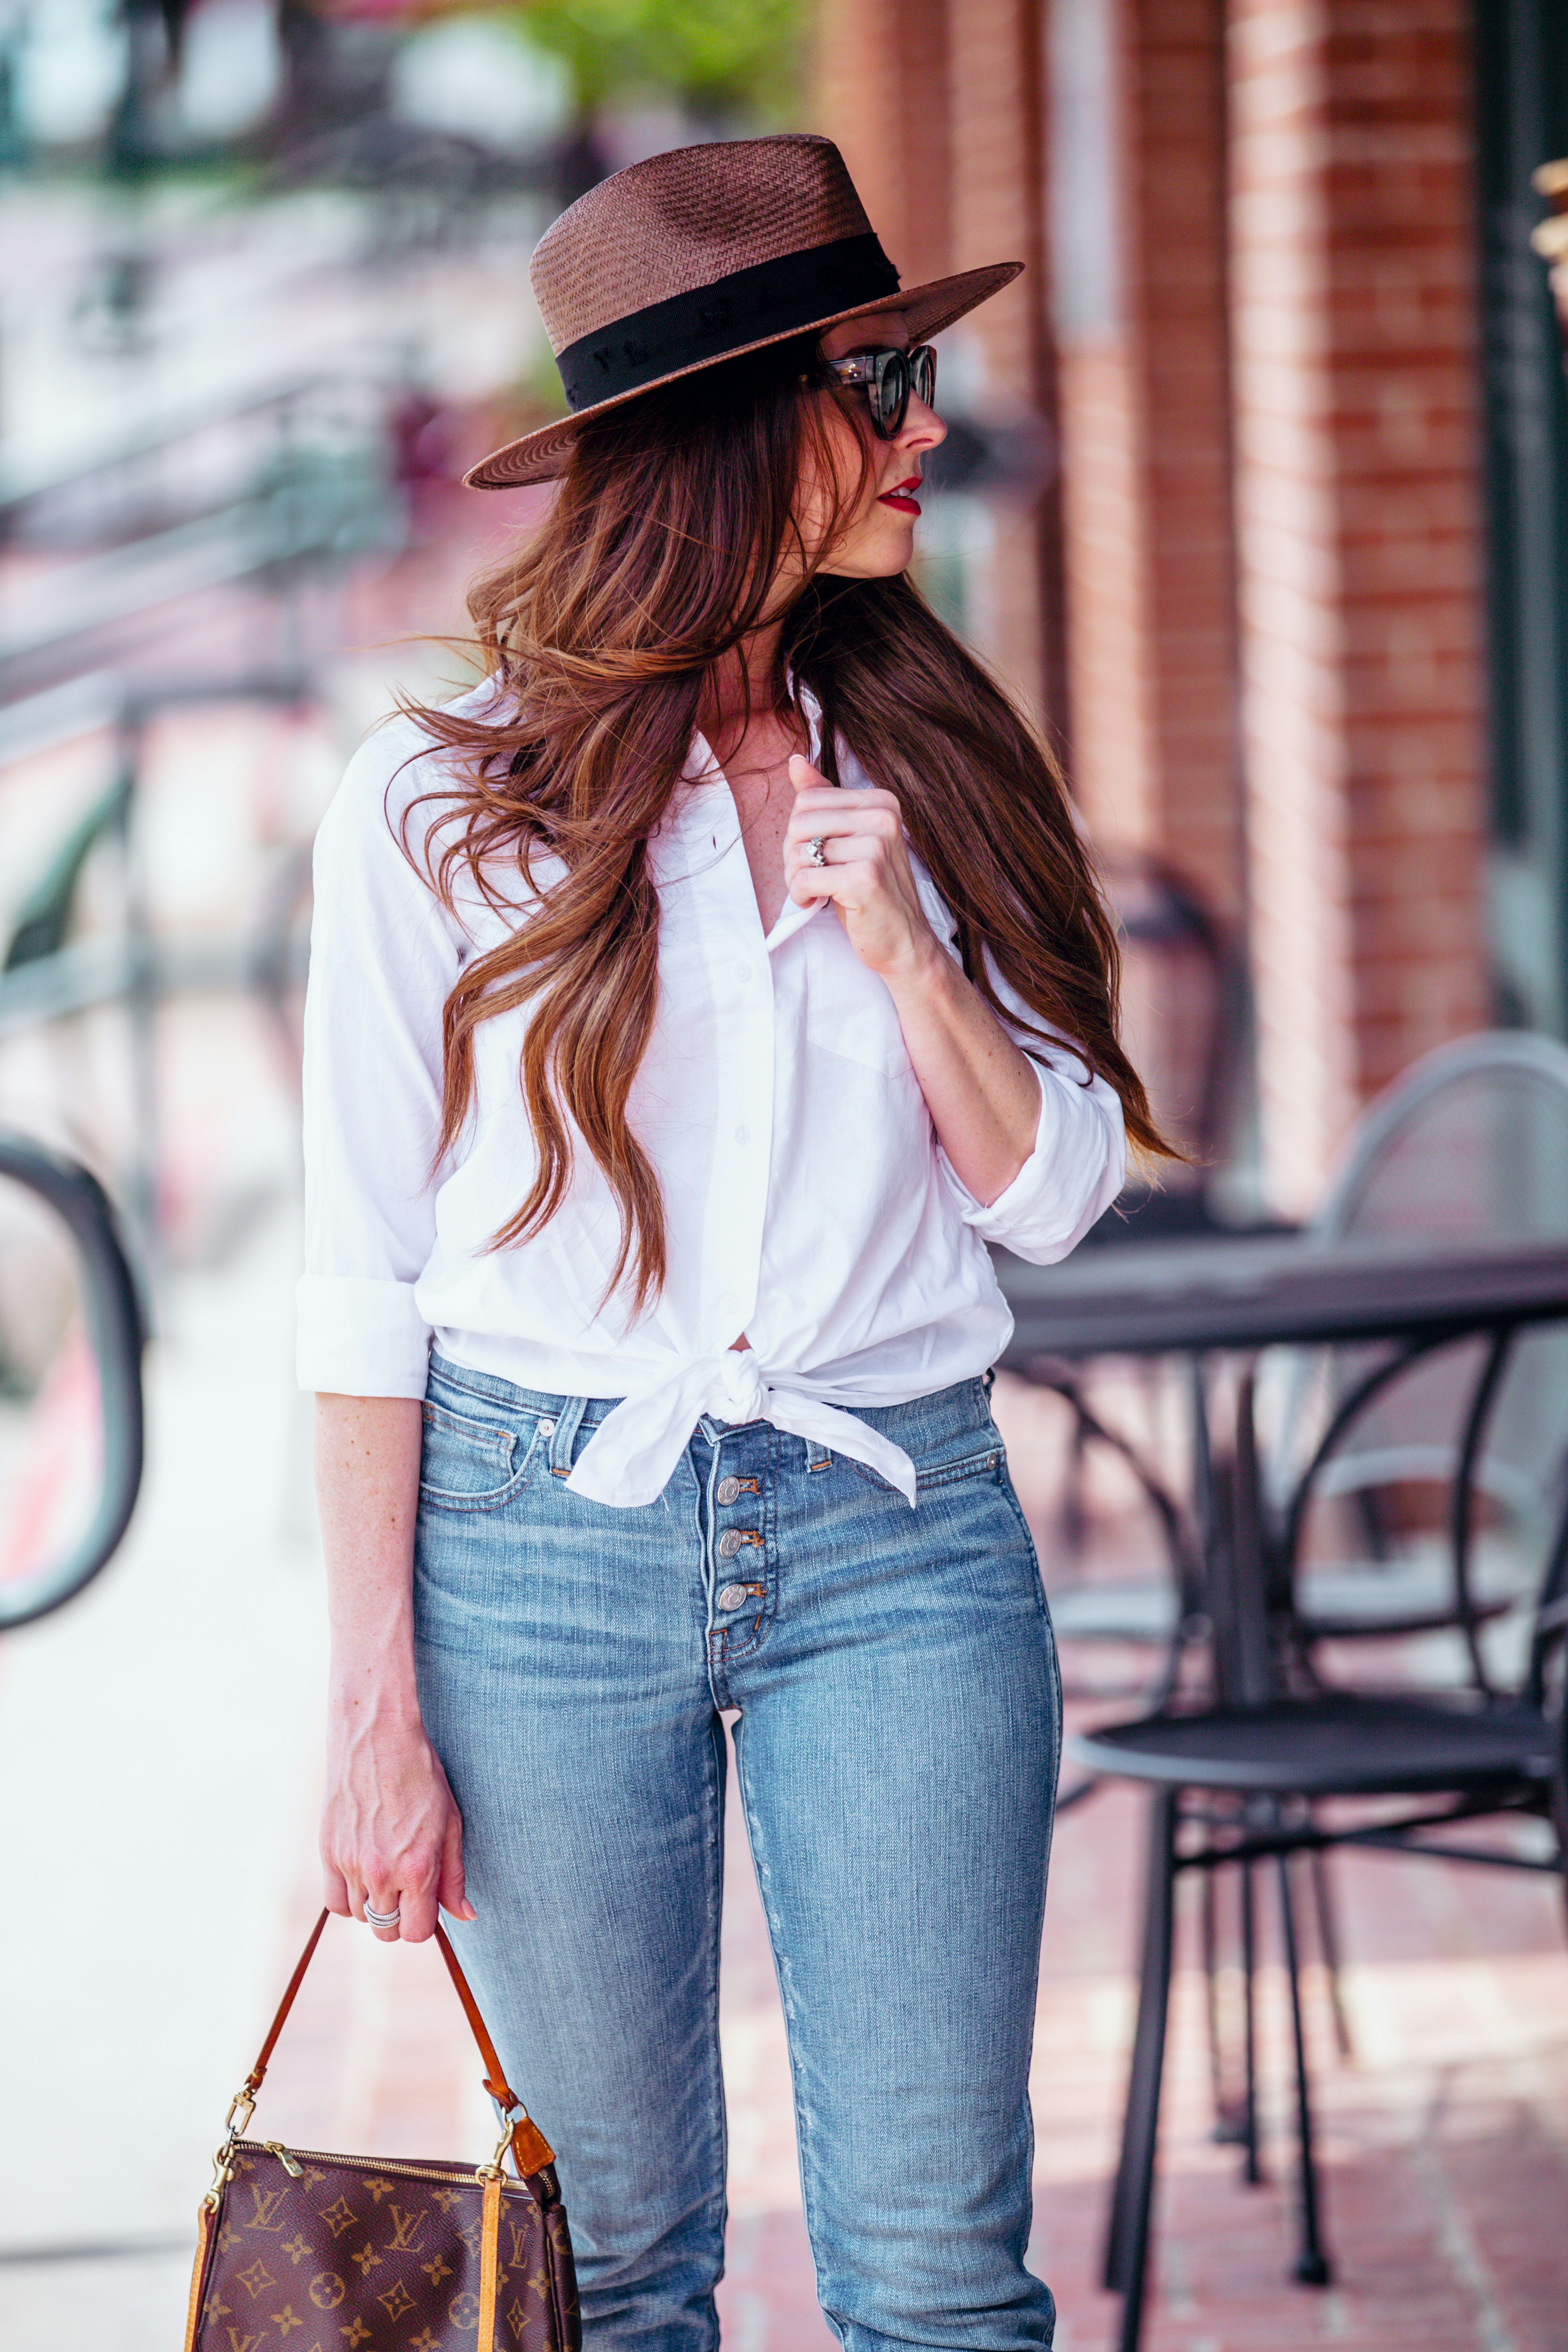 blue denim and white outfits